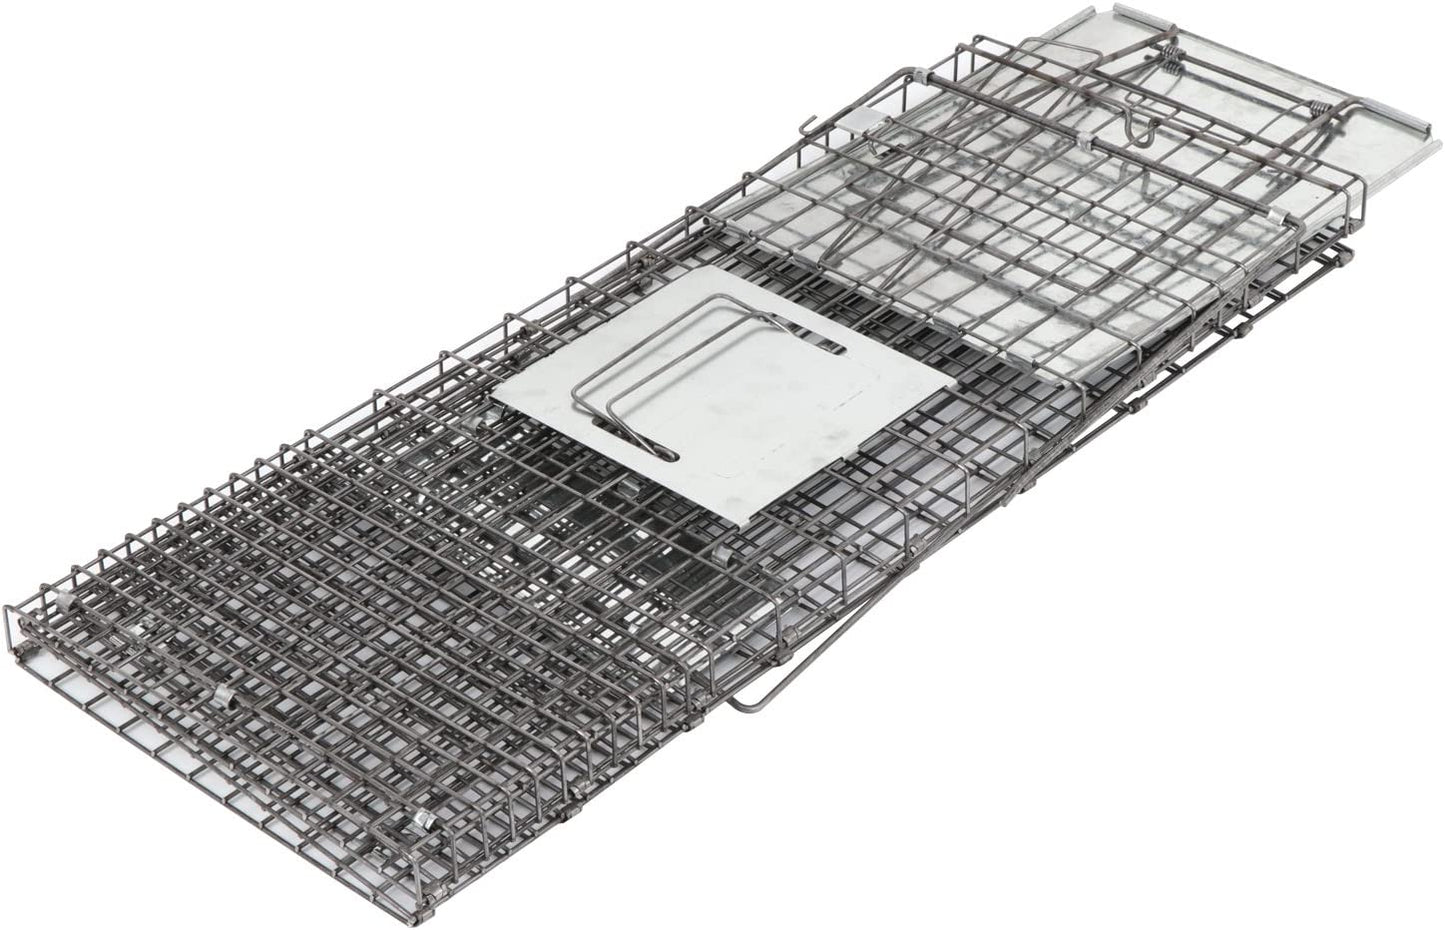 Live Animal Cage Trap 32" X 12.5" X 12" w/Iron Door Steel Cage Catch Release Humane Rodent Cage for Rabbits, Stray Cat, Squirrel, Raccoon, Mole, Gopher, Chicken, Opossum, Skunk & Chipmunks